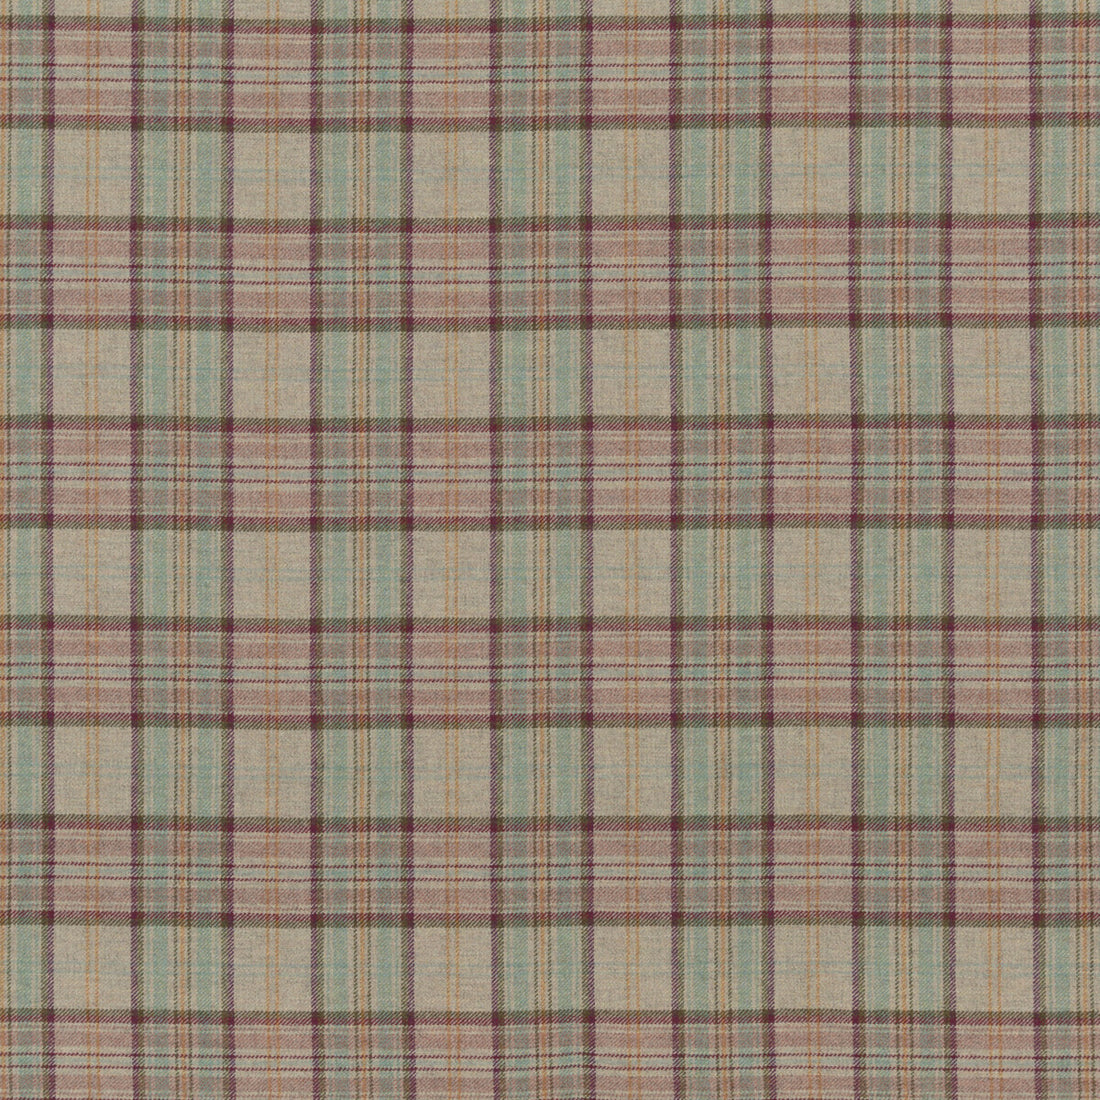 Victoria Plaid fabric in quartz color - pattern BF10655.1.0 - by G P &amp; J Baker in the Historic Royal Palaces collection